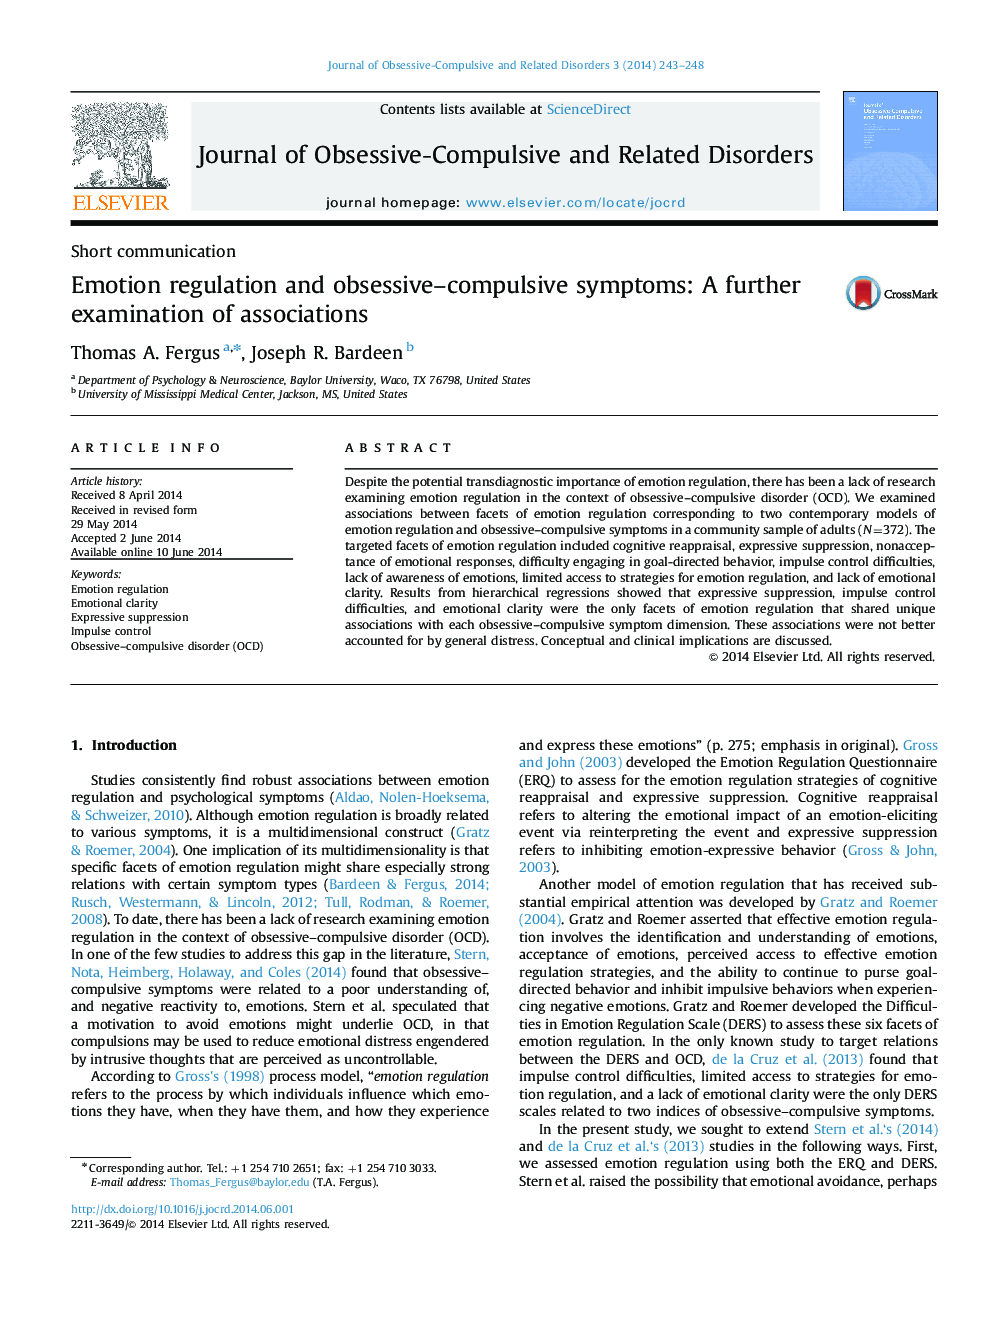 Emotion regulation and obsessive–compulsive symptoms: A further examination of associations